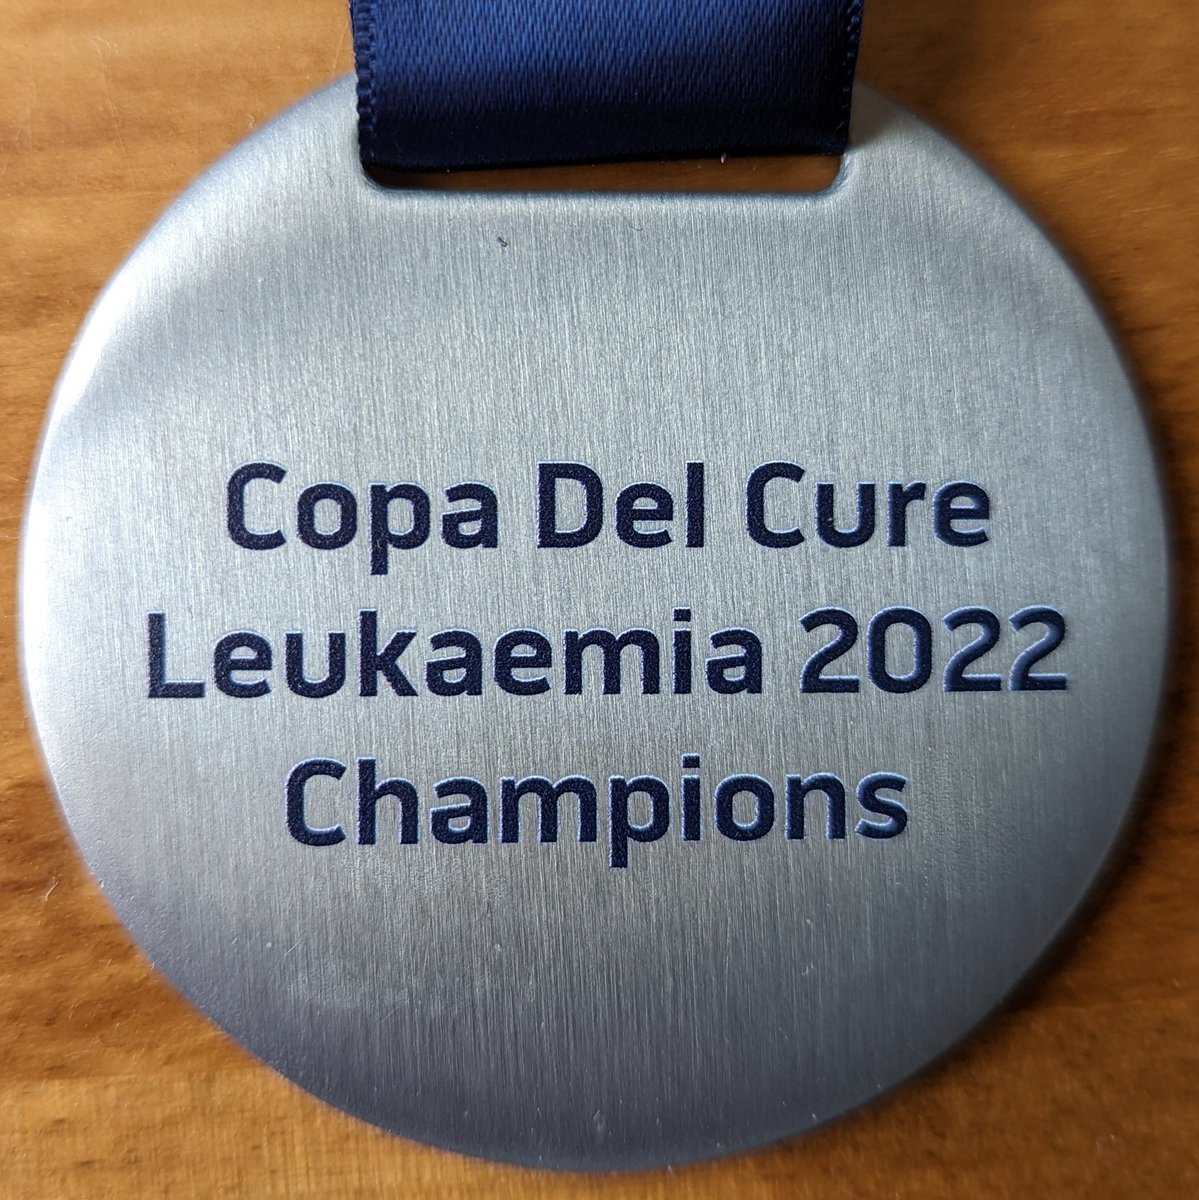 Grateful for the opportunity to take part in this year's @CopaDelCL & very proud to play for our Manager @lixxiedean in support of @CureLeukaemia ❤⚽️

We dedicate this win to all the Leukaemia patients past, present & watching from the skies🙏🏆

#clfamily #copadelcl #finishit